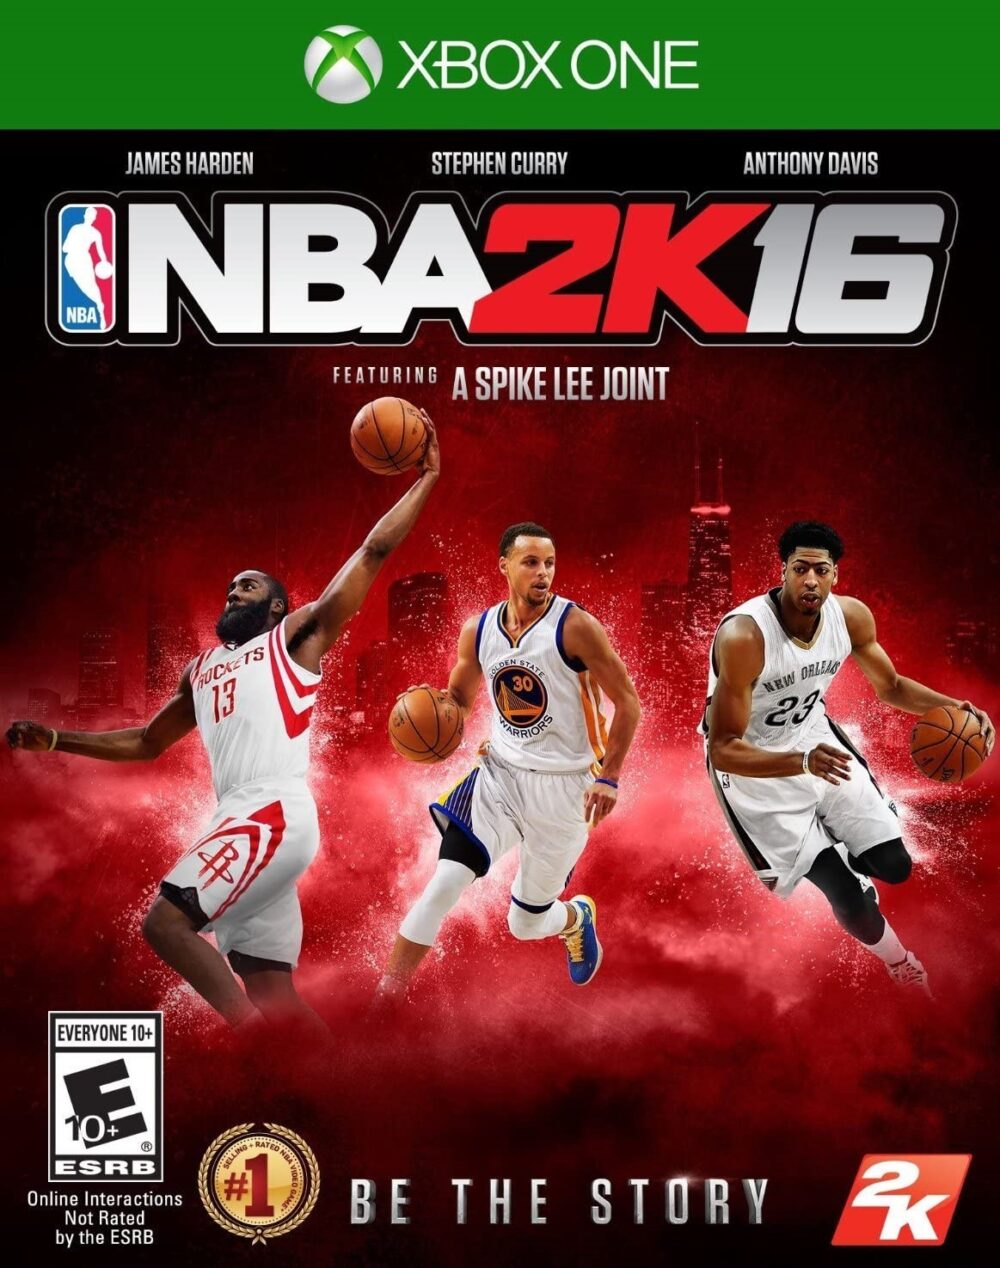 NBA 2K16 for Xbox One